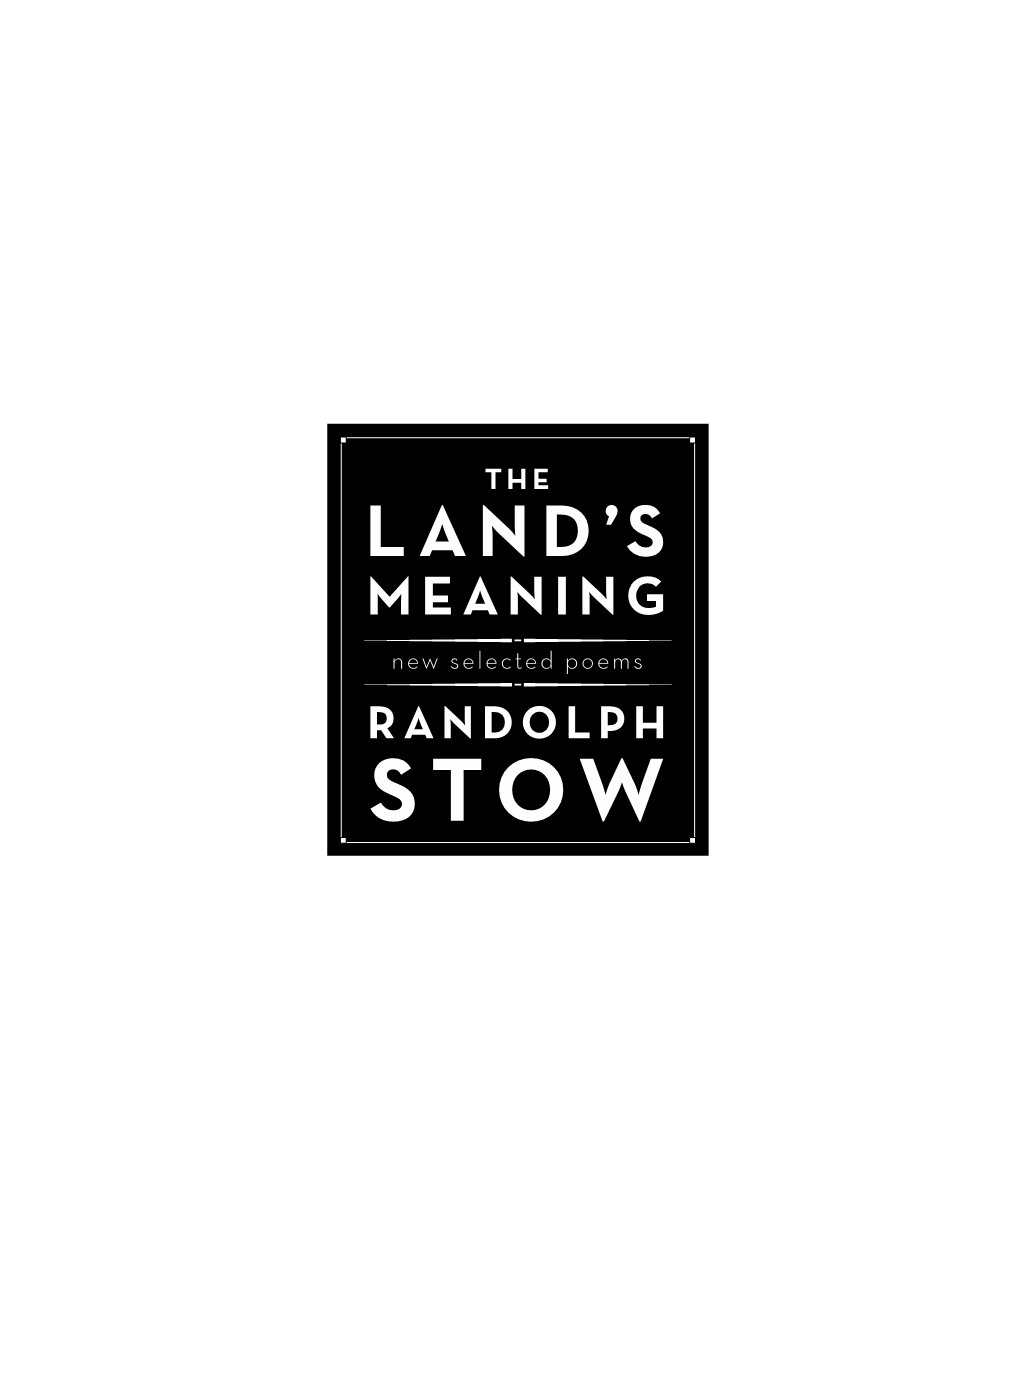 [Half-Title] the Land's Meaning New Selected Poems Randolph Stow